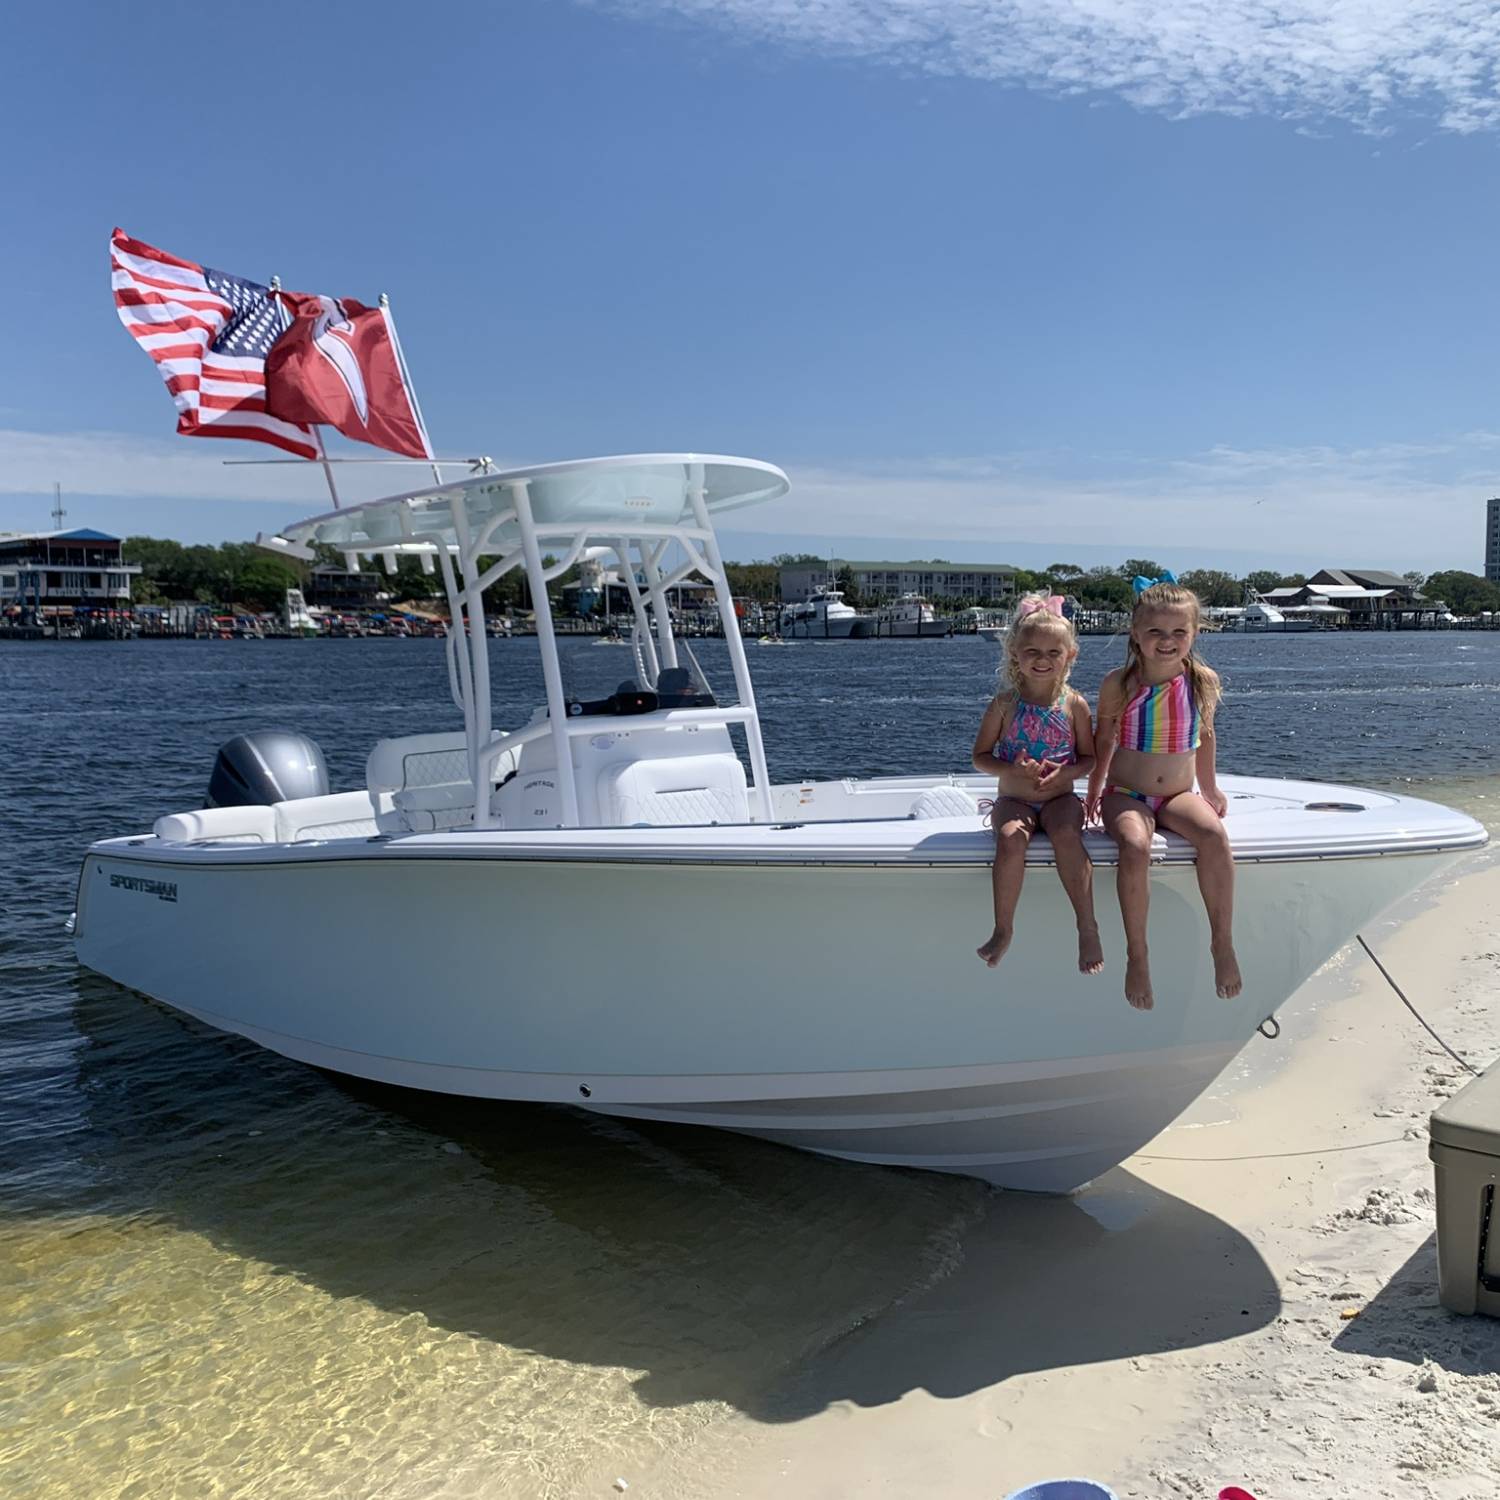 Title: Living our Best Life - On board their Sportsman Heritage 231 Center Console - Location: Destin, FL. Participating in the Photo Contest #SportsmanOctober2021